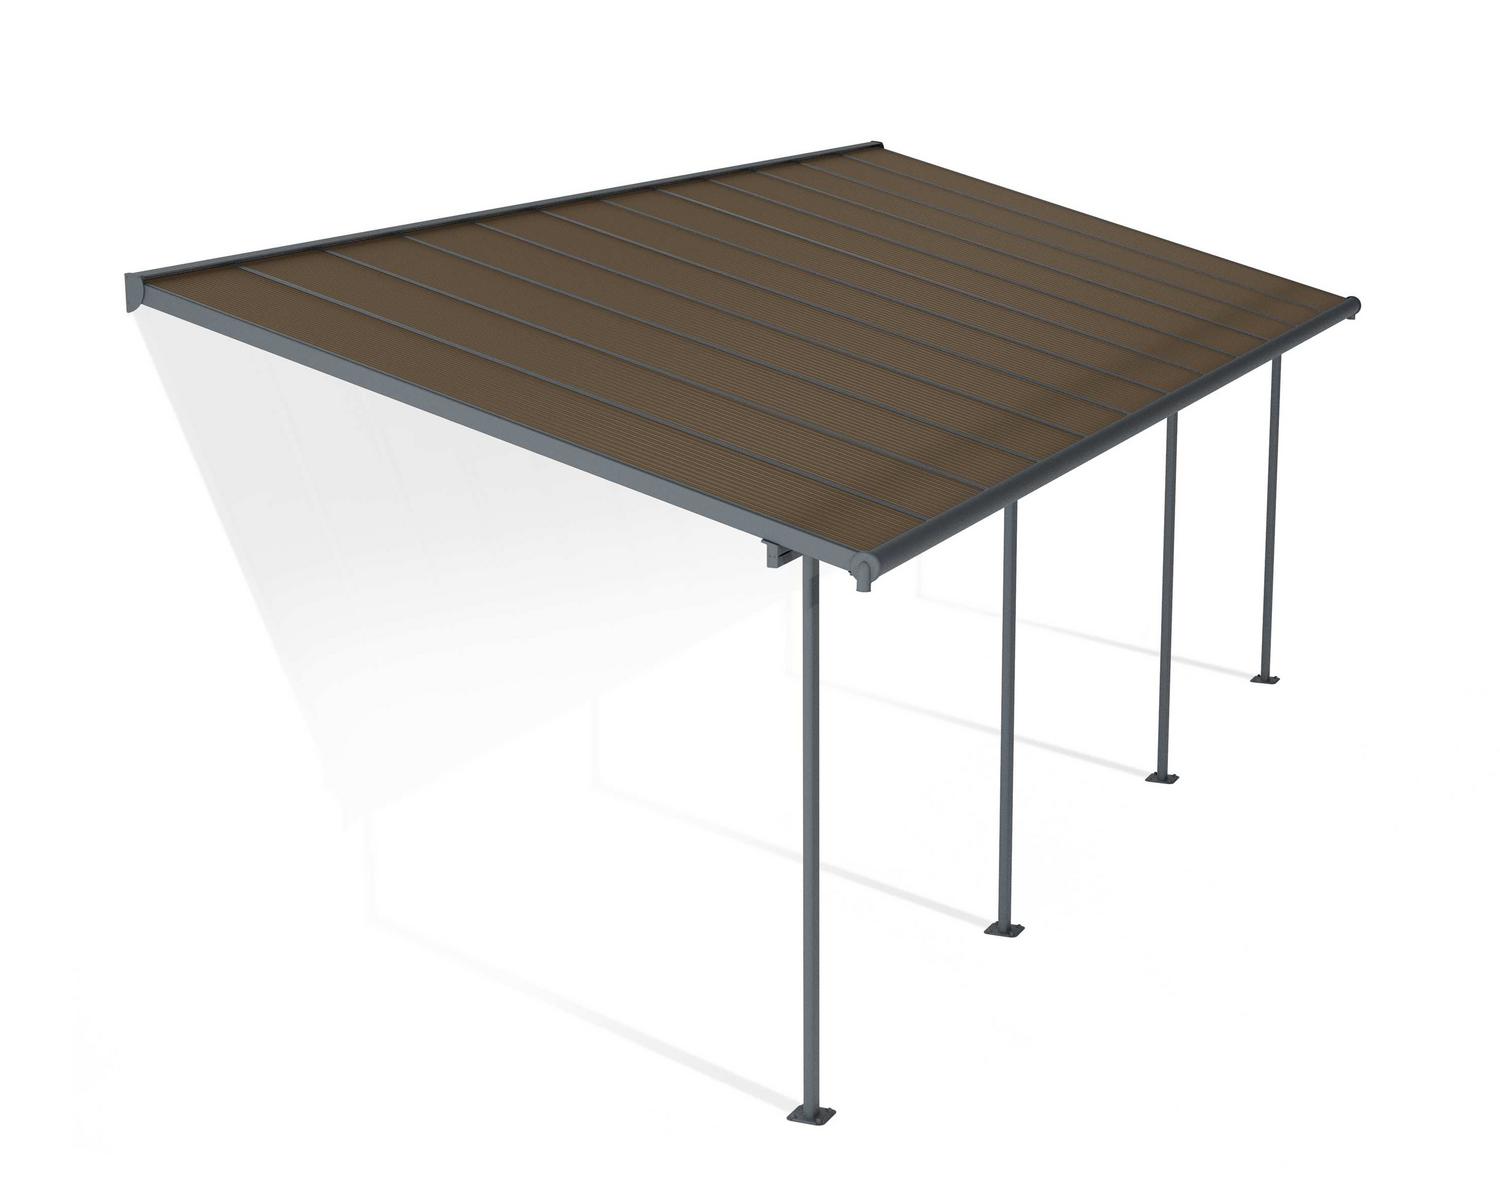 Capri 10 ft. x 24 ft. Grey Aluminium Patio Cover With 4 Posts, Bronze-tinted twin-wall polycarbonate roof panels.